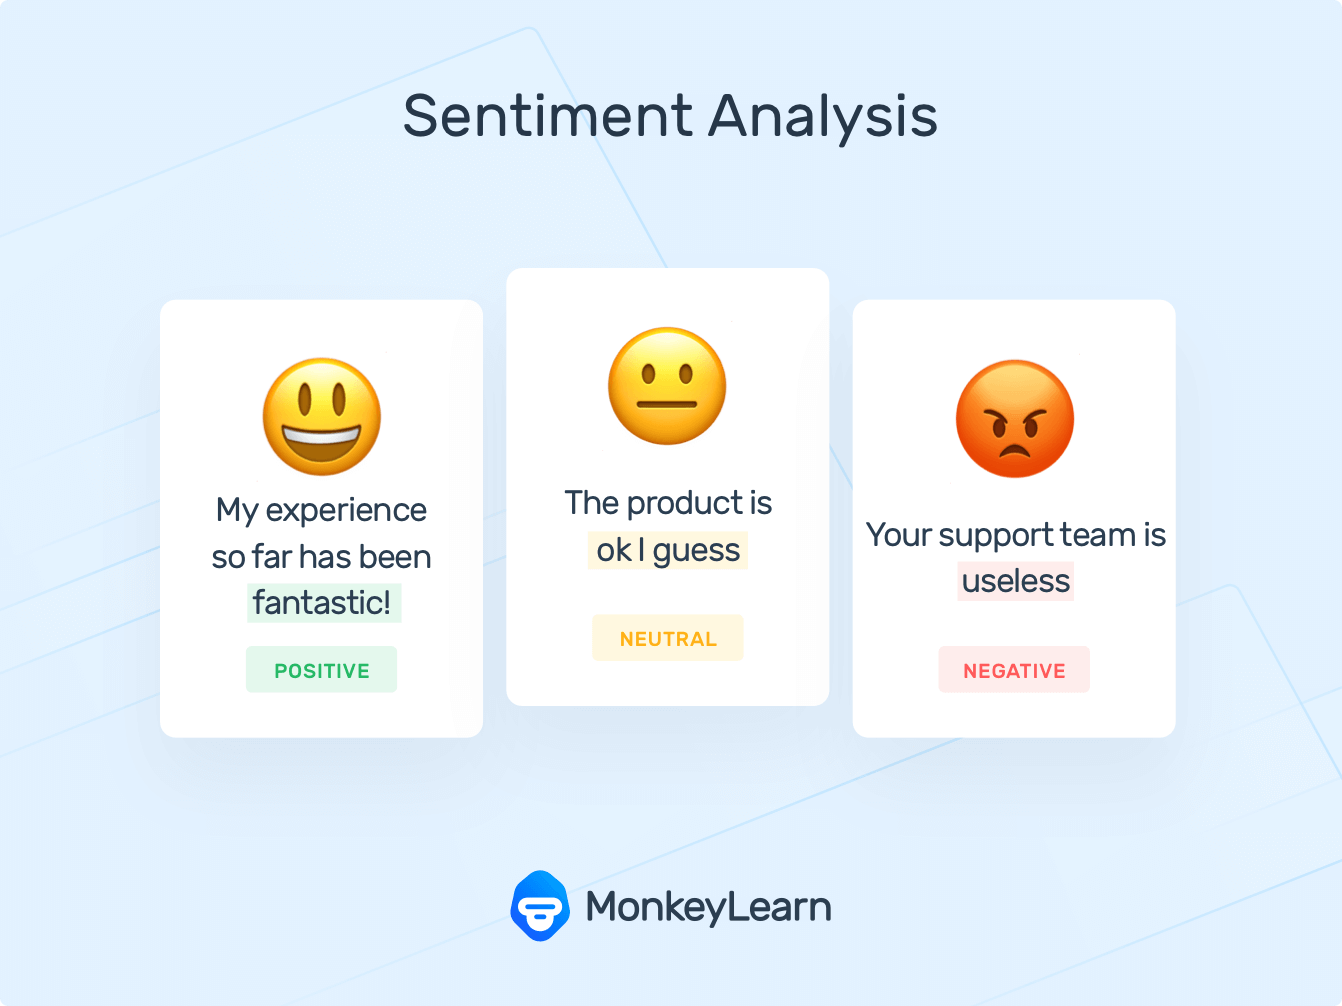 How sentiment analysis recognizes positive, neutral, and negative sentiments in conversations.